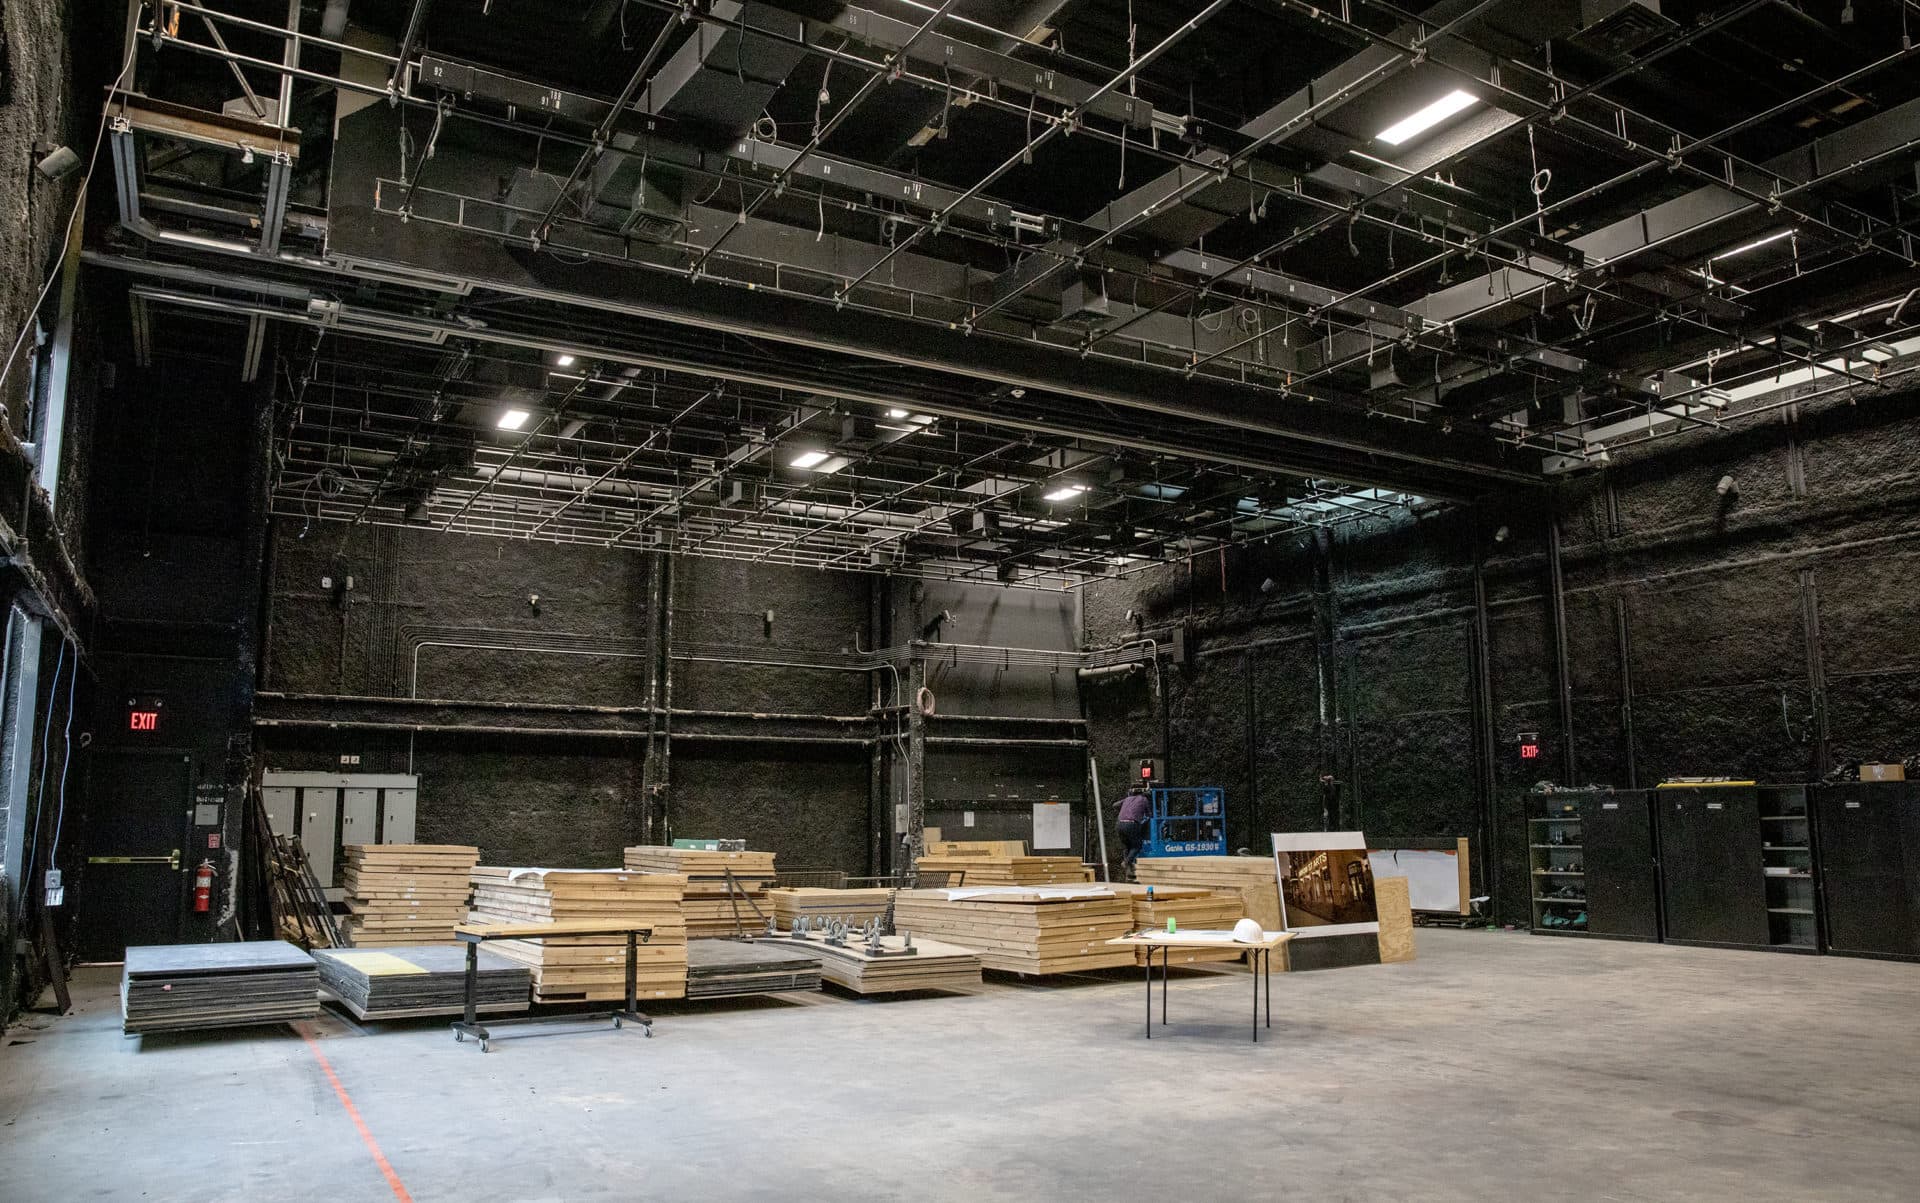 The flexible main theater space at Arrow Street will have a movable stage and movable seating so it can be configured in different ways for different productions. (Robin Lubbock/WBUR)